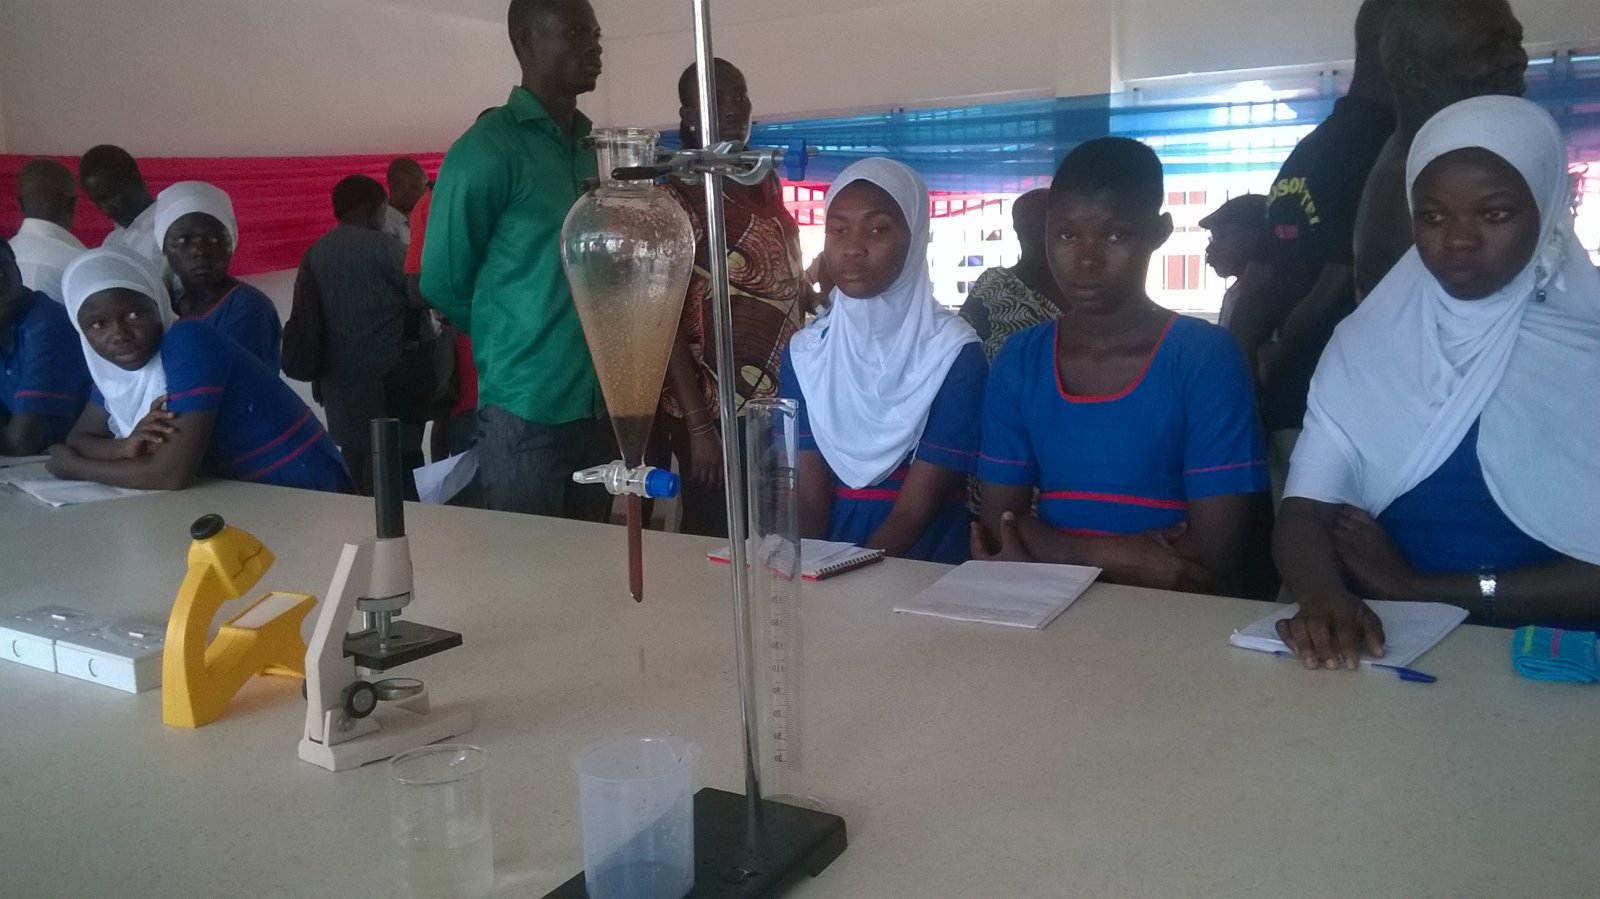 Pupils were taken through demonstration of science subjects.